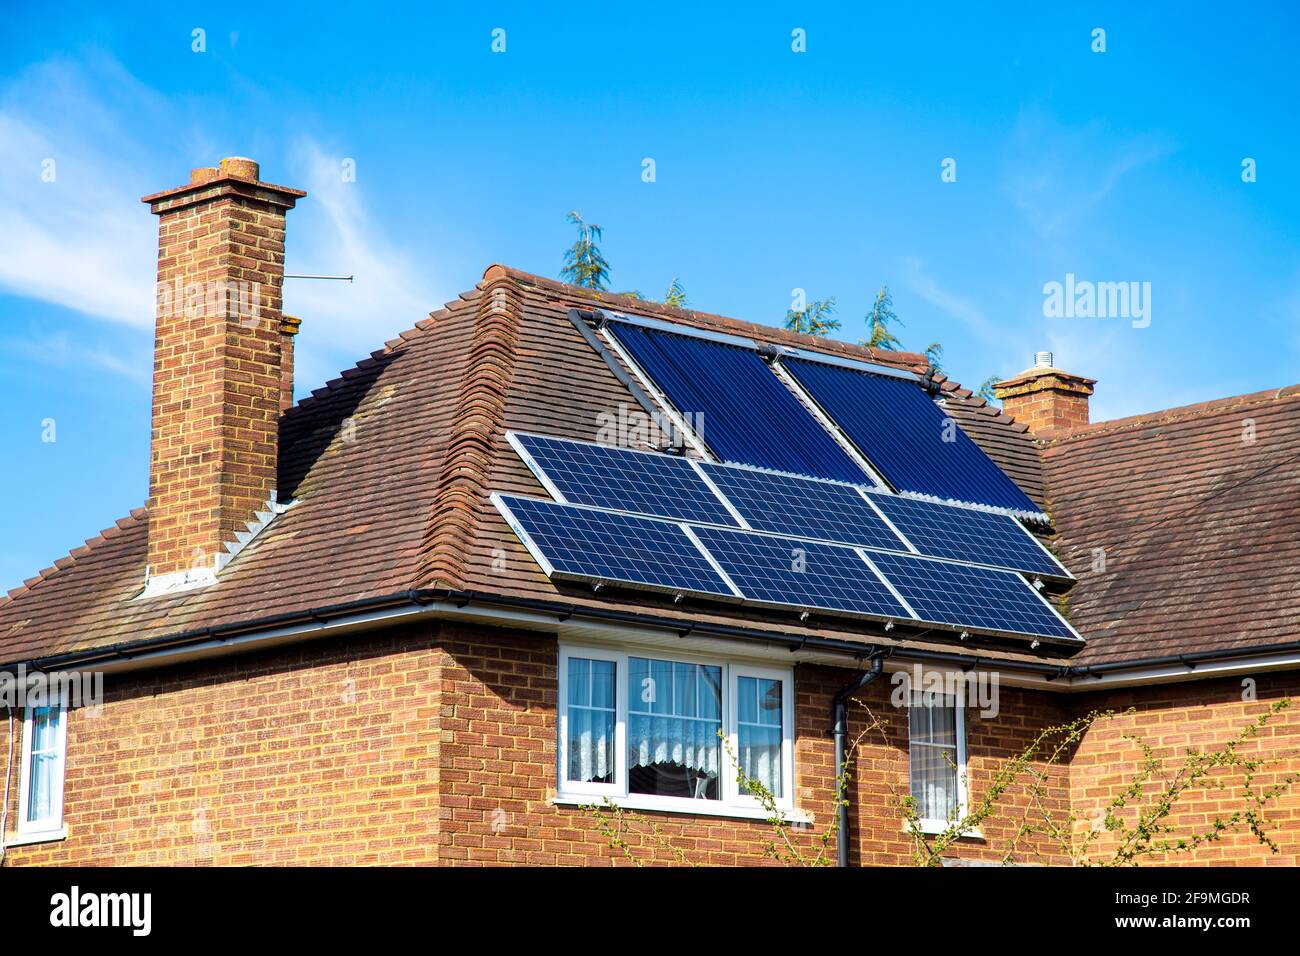 Brick house with solar panels and solar water heating panels on the roof in Hertfordshire, UK Stock Photo